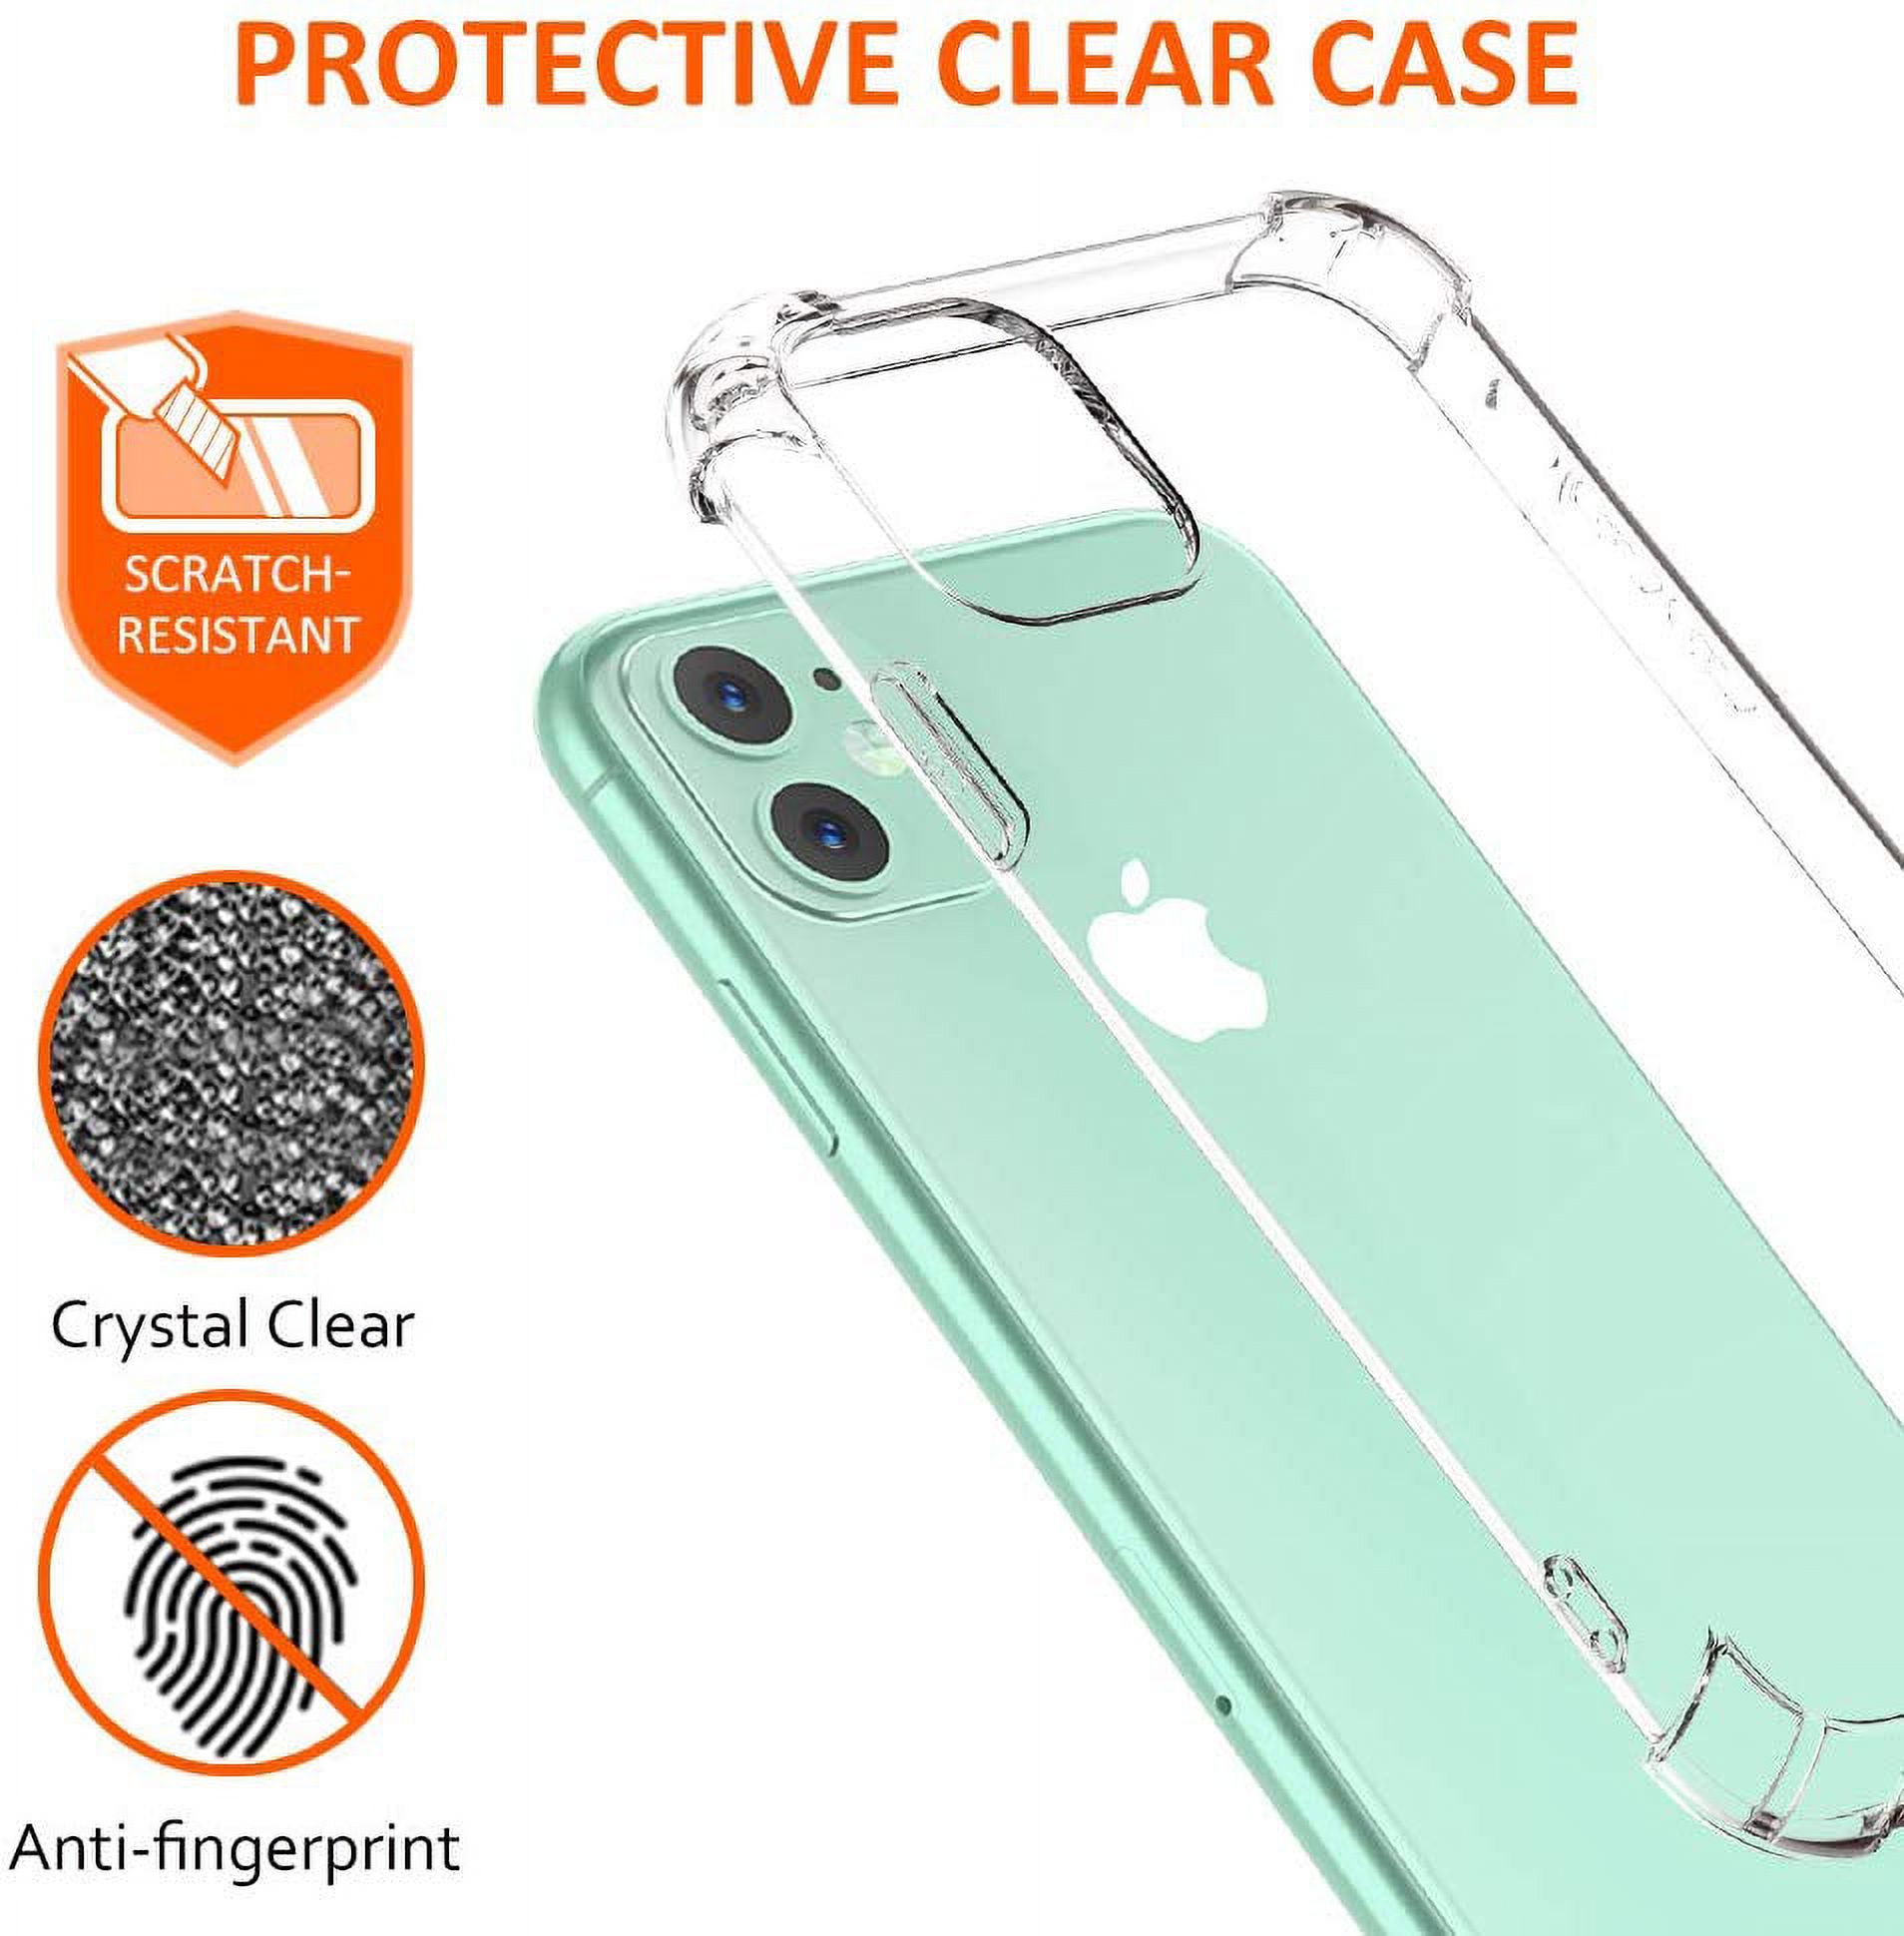 iPhone SE 2020 / iPhone 12 12 Pro Max / 11 11 Pro Max / XR X XS XS Max / 7 8 Plus Case, Njjex iPhone 11 Pro Max Crystal Clear Shock Absorption Technology Bumper Soft TPU Cover Case for Apple - image 4 of 6